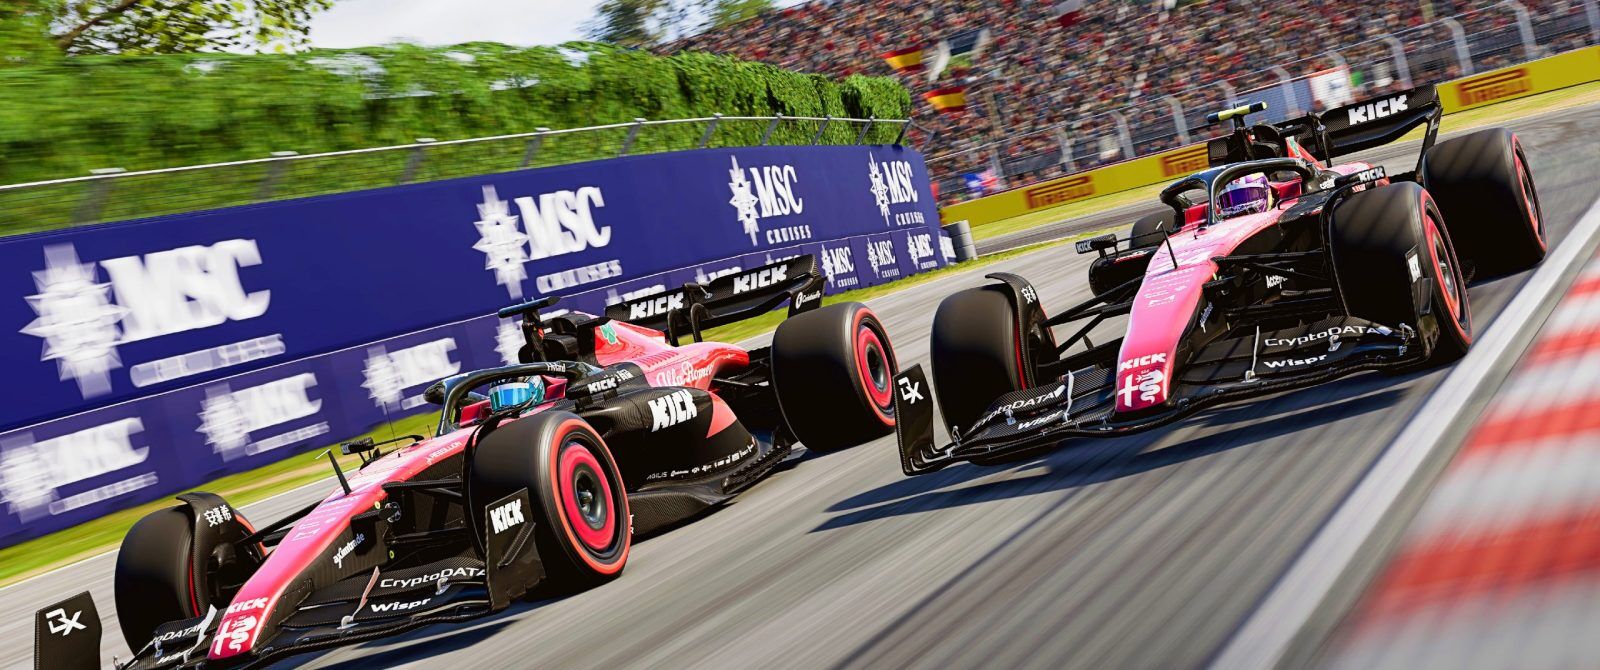 Two red and black F1 cars side by side at speed